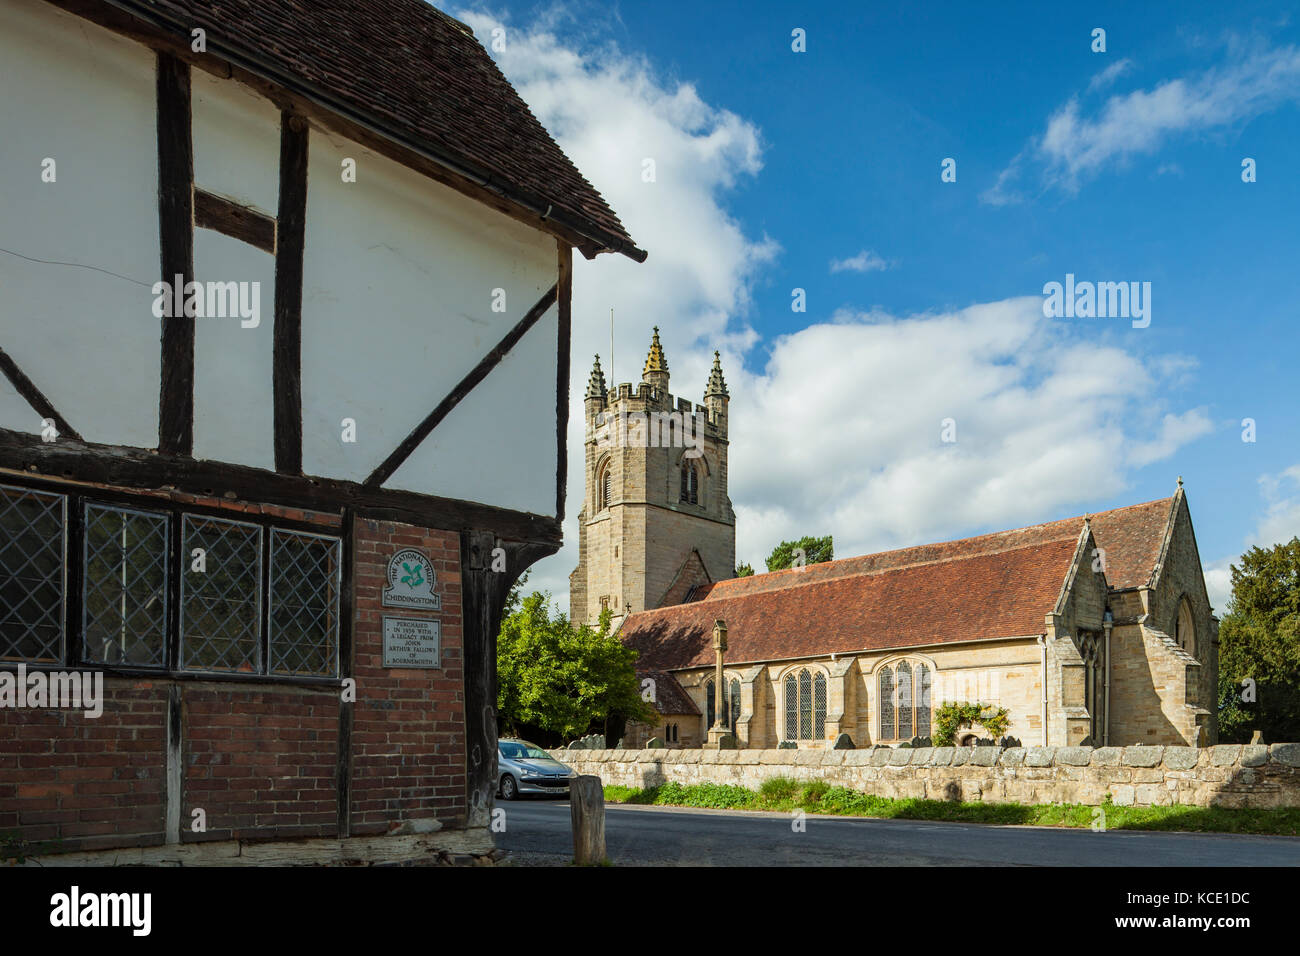 Autumn afternoon in Chiddingstone village, Kent, England. Stock Photo